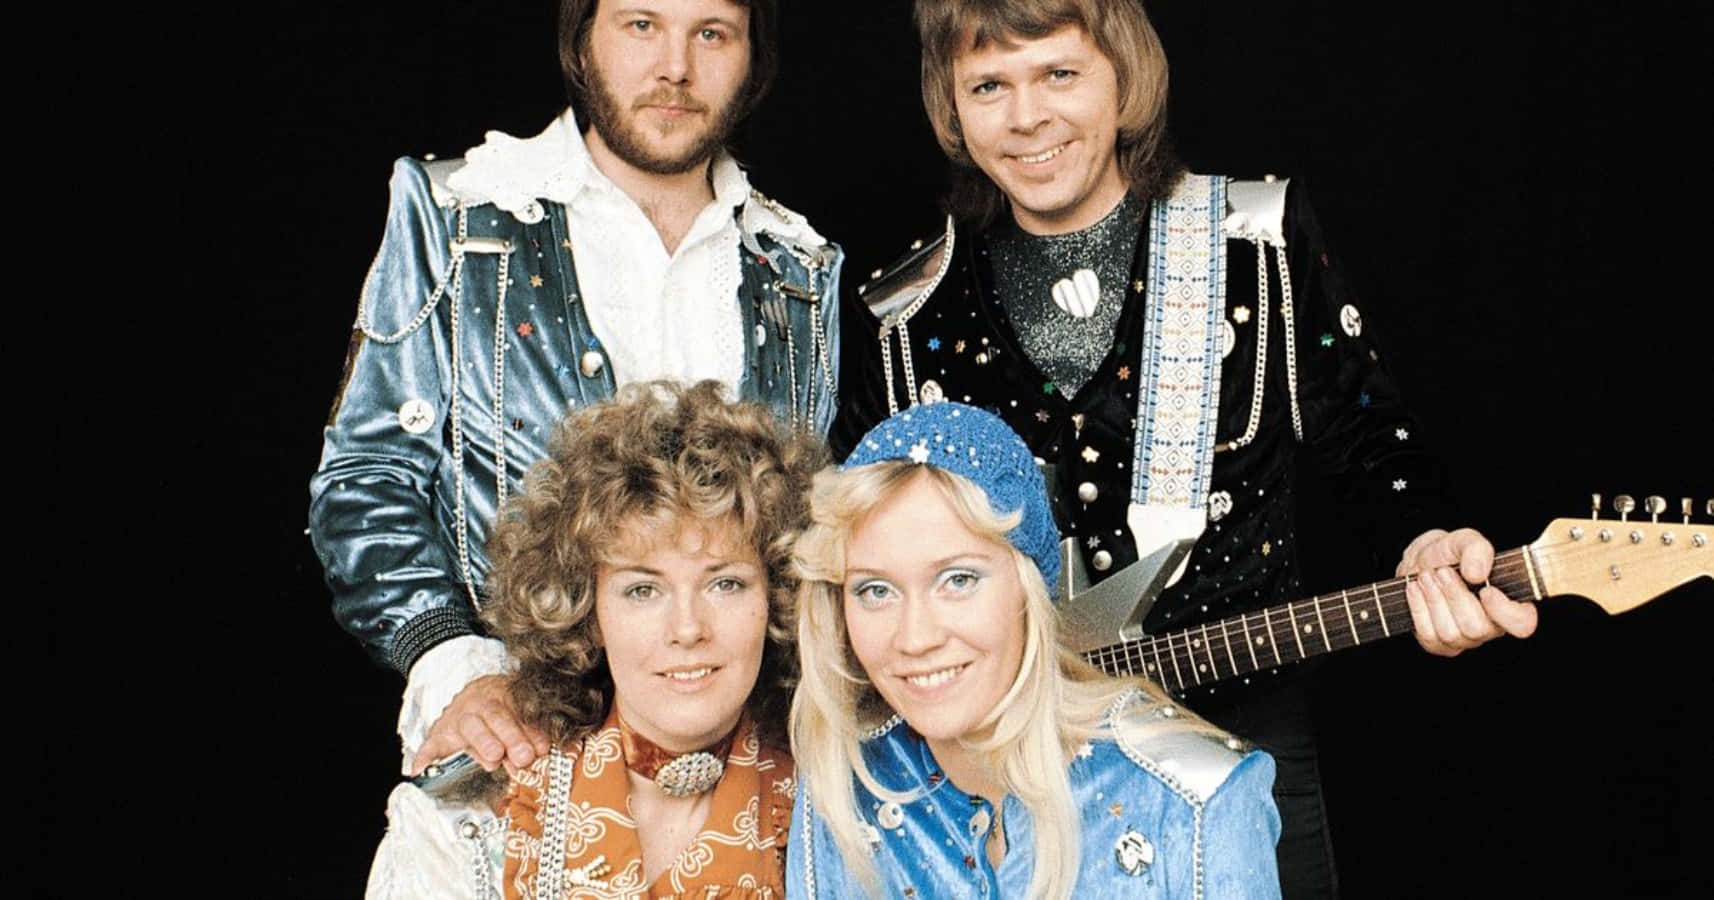 Sweden's Supergroup ABBA